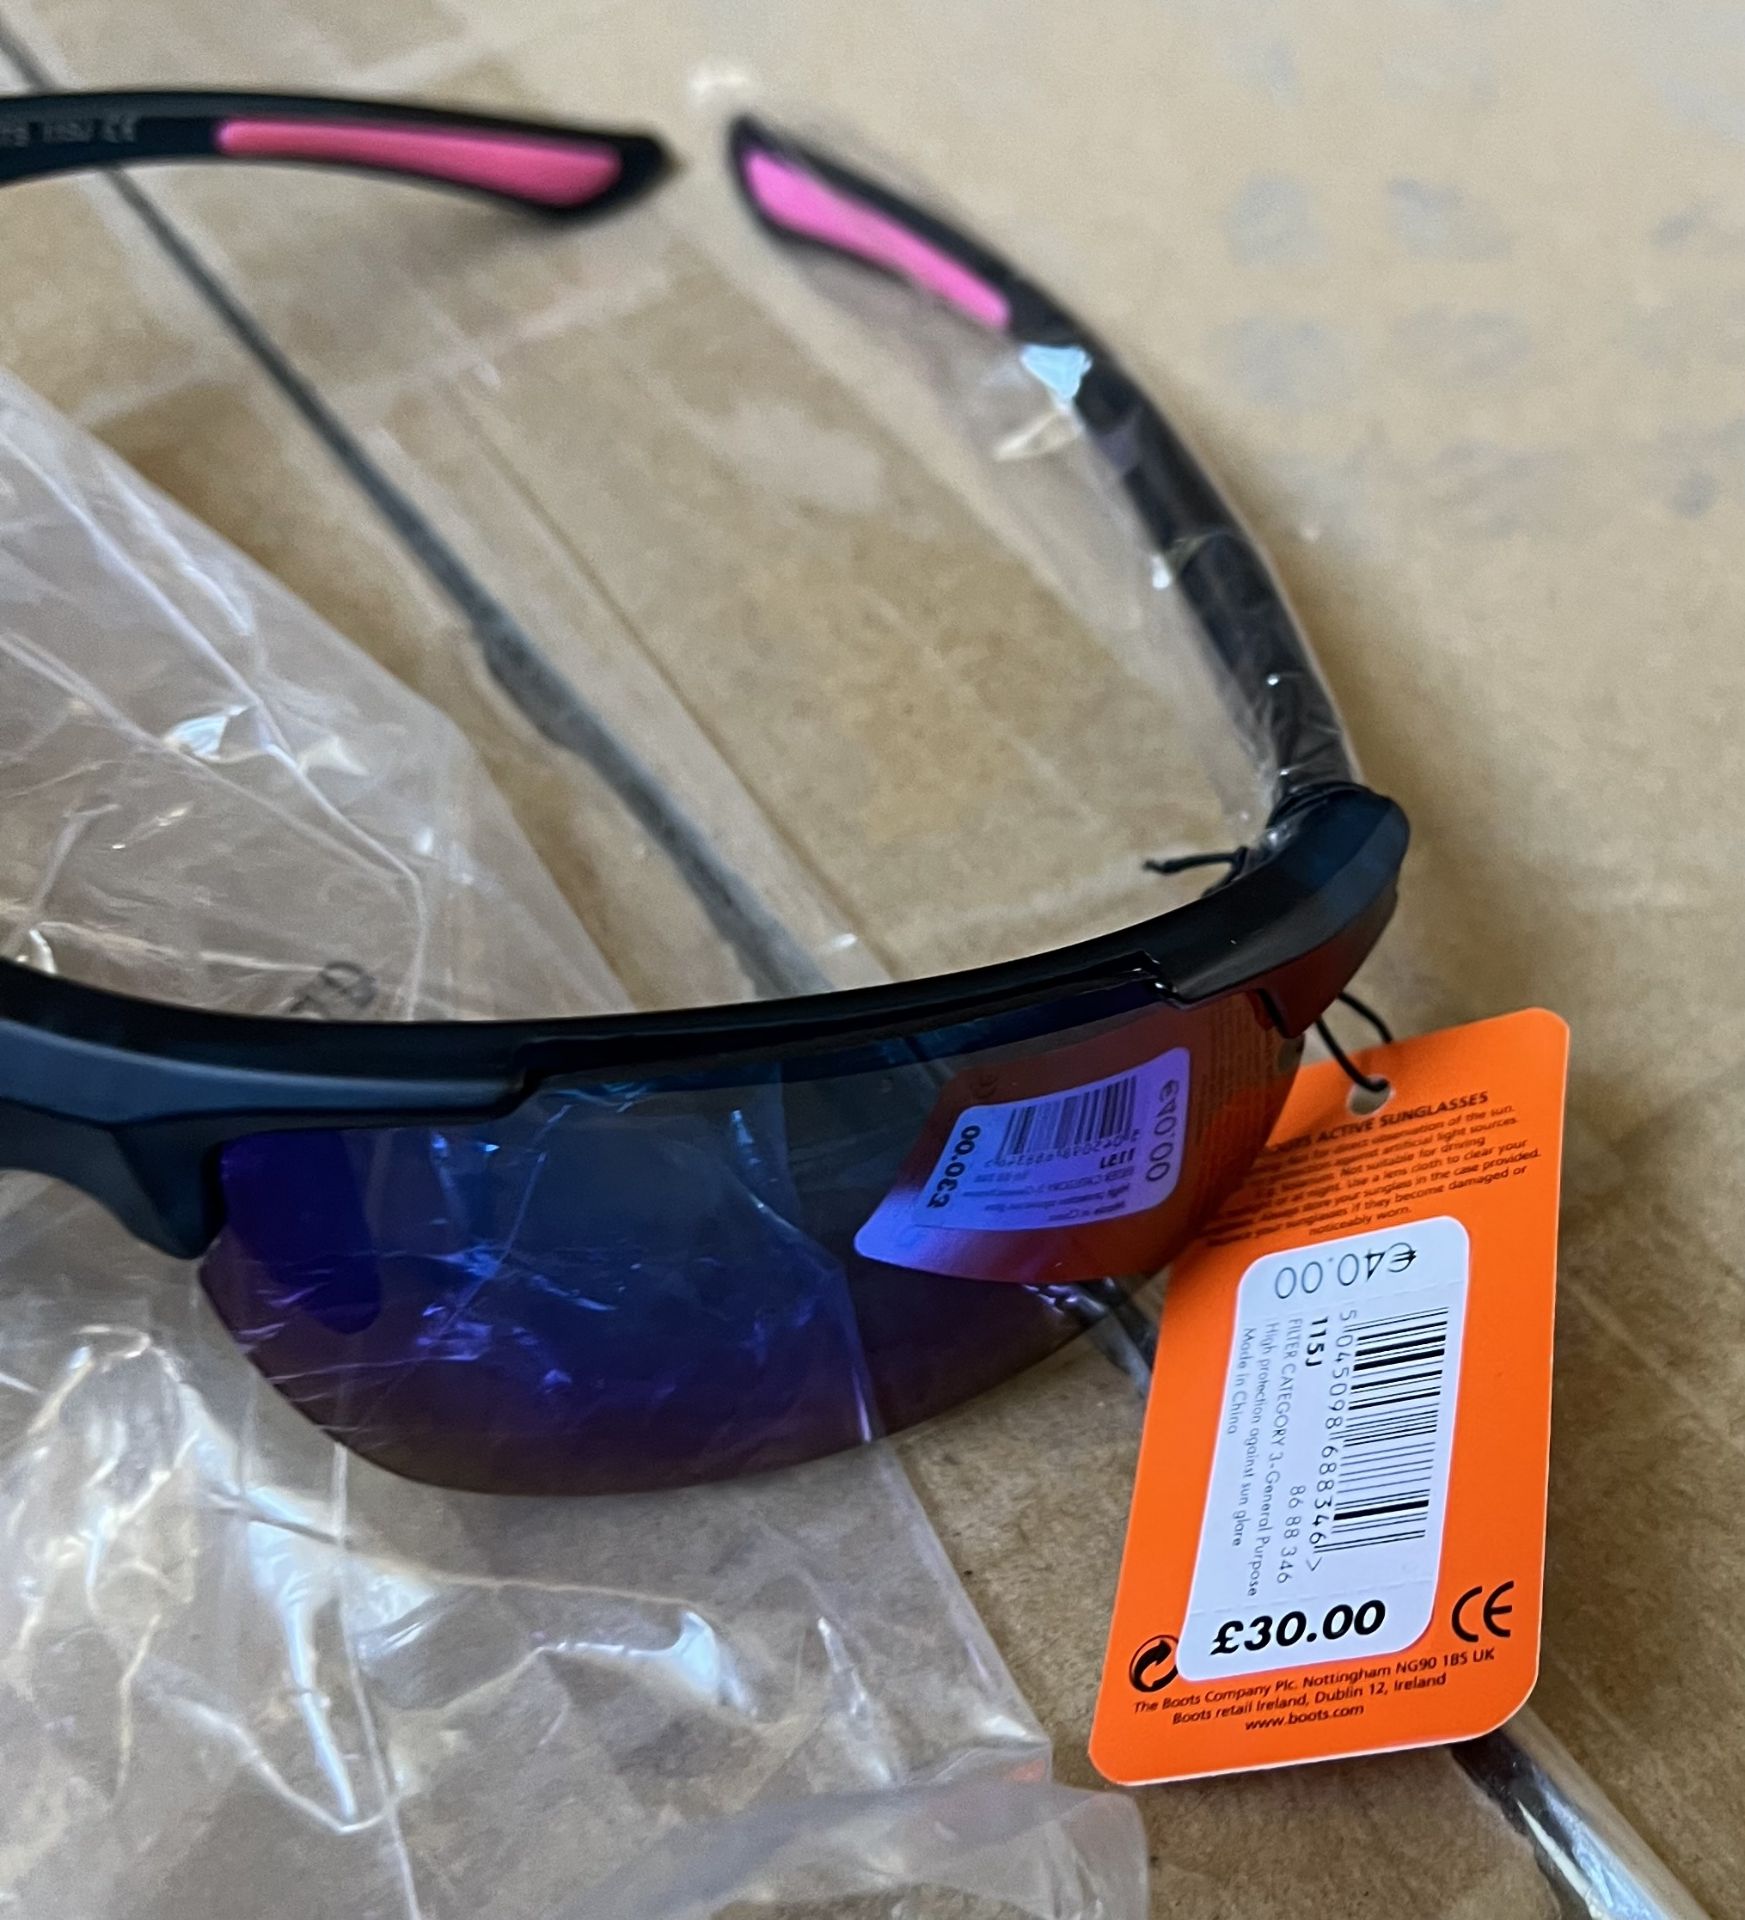 40 x Boots Active Sports Styled Sunglasses 100% UVA - (NEW) - BOOTS RRP £1,000 ! - Image 2 of 3